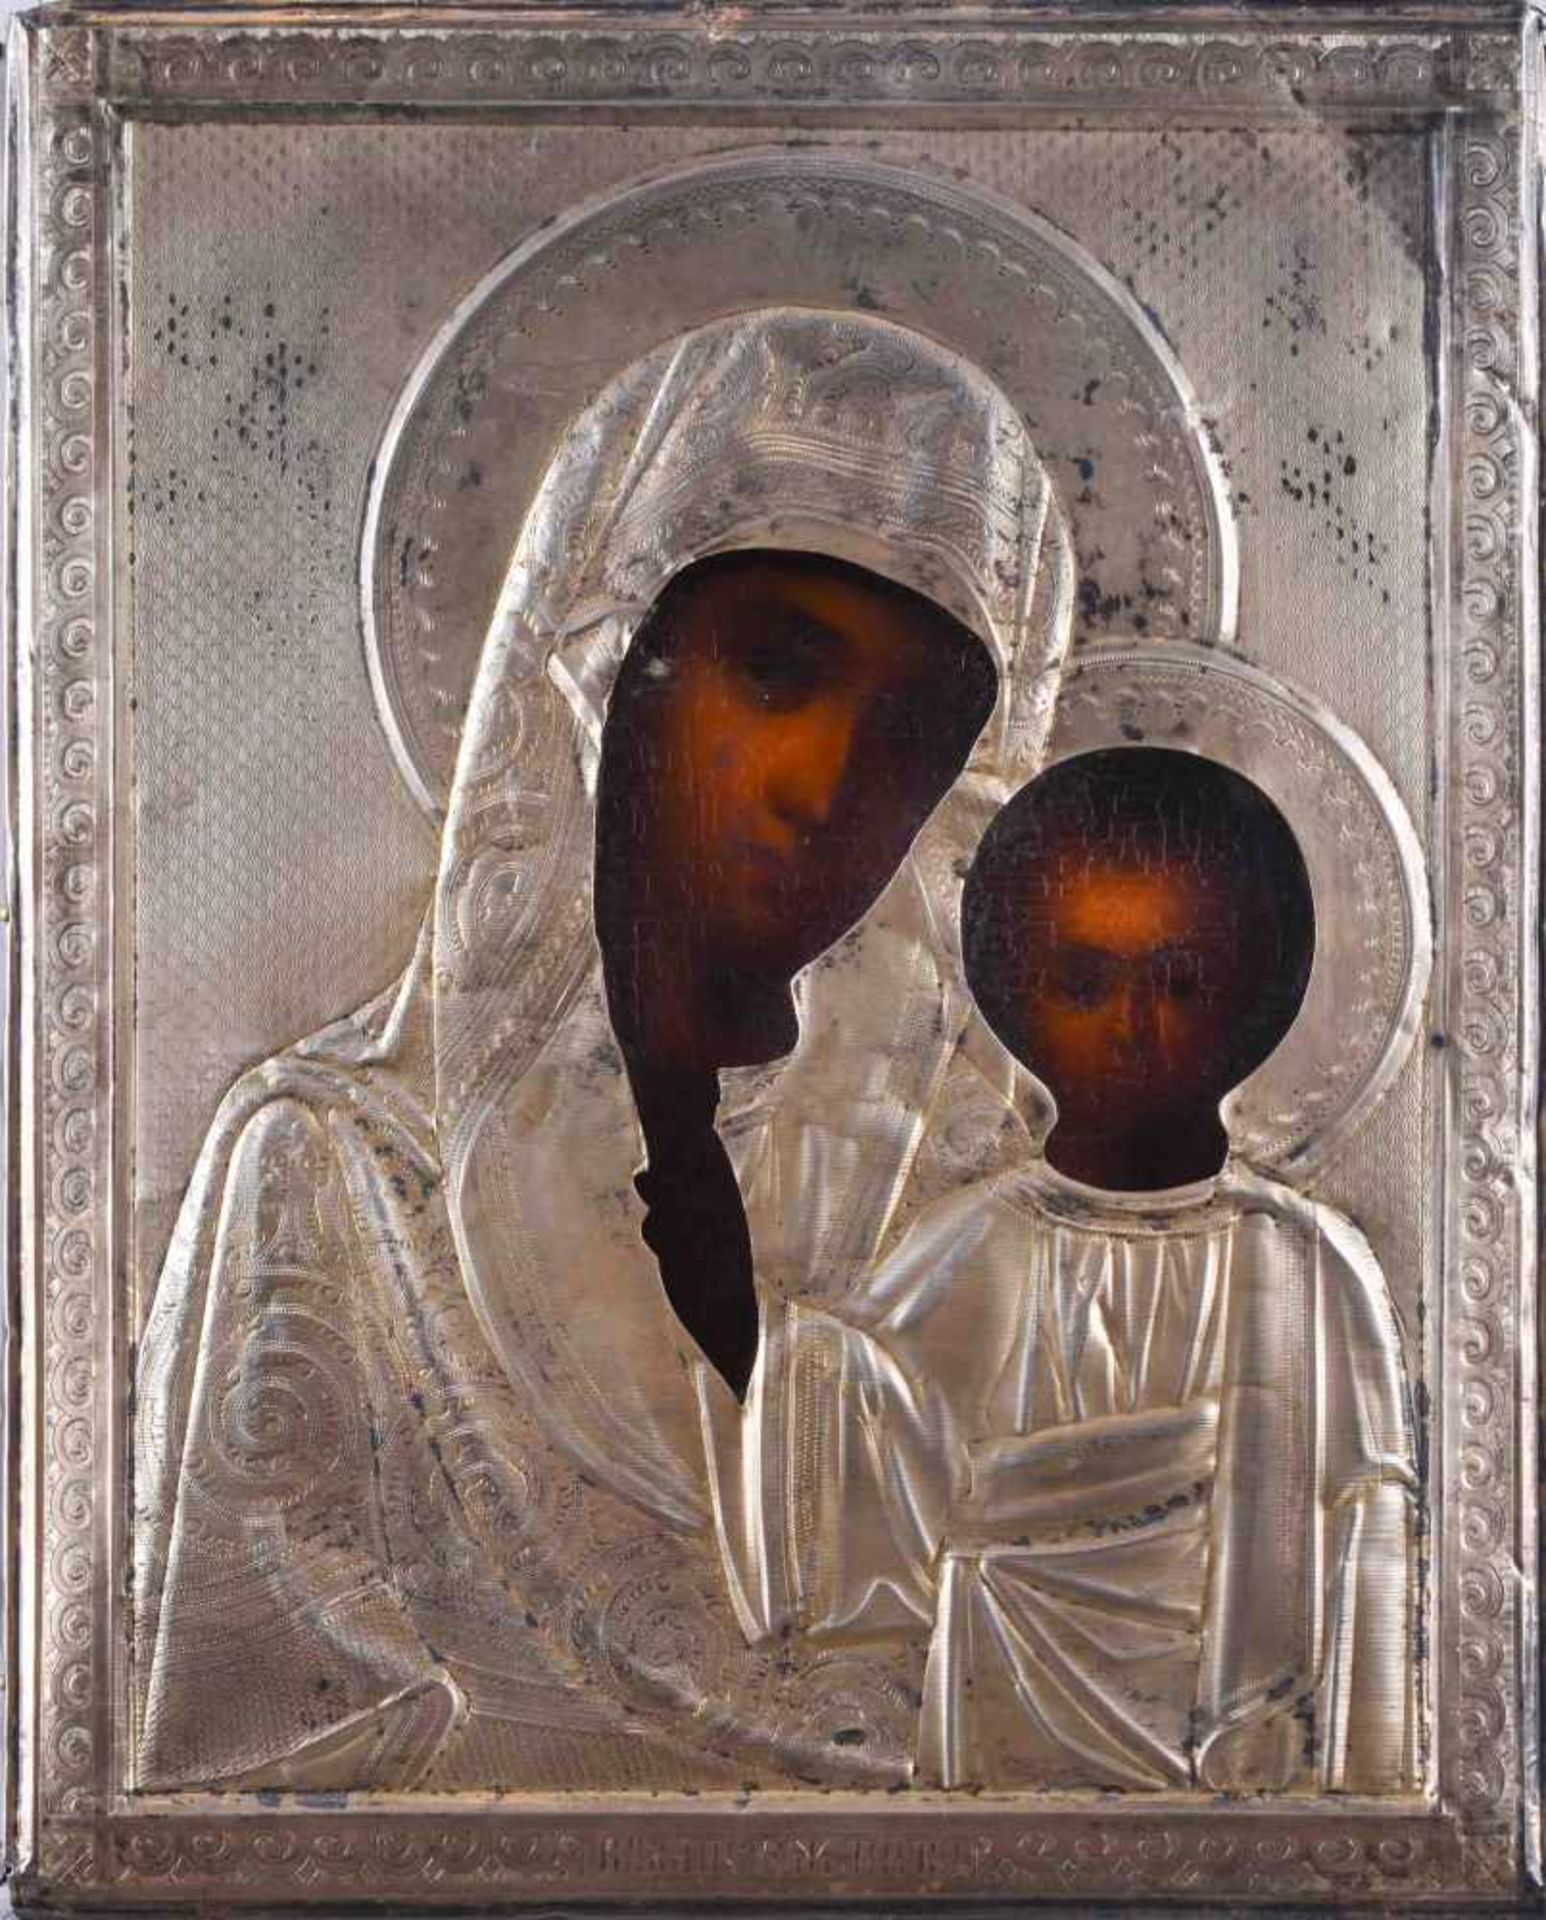 Icon Russia 19th centurywith silver ornaments gildet, mother of Kasan", egg tempera on wood,